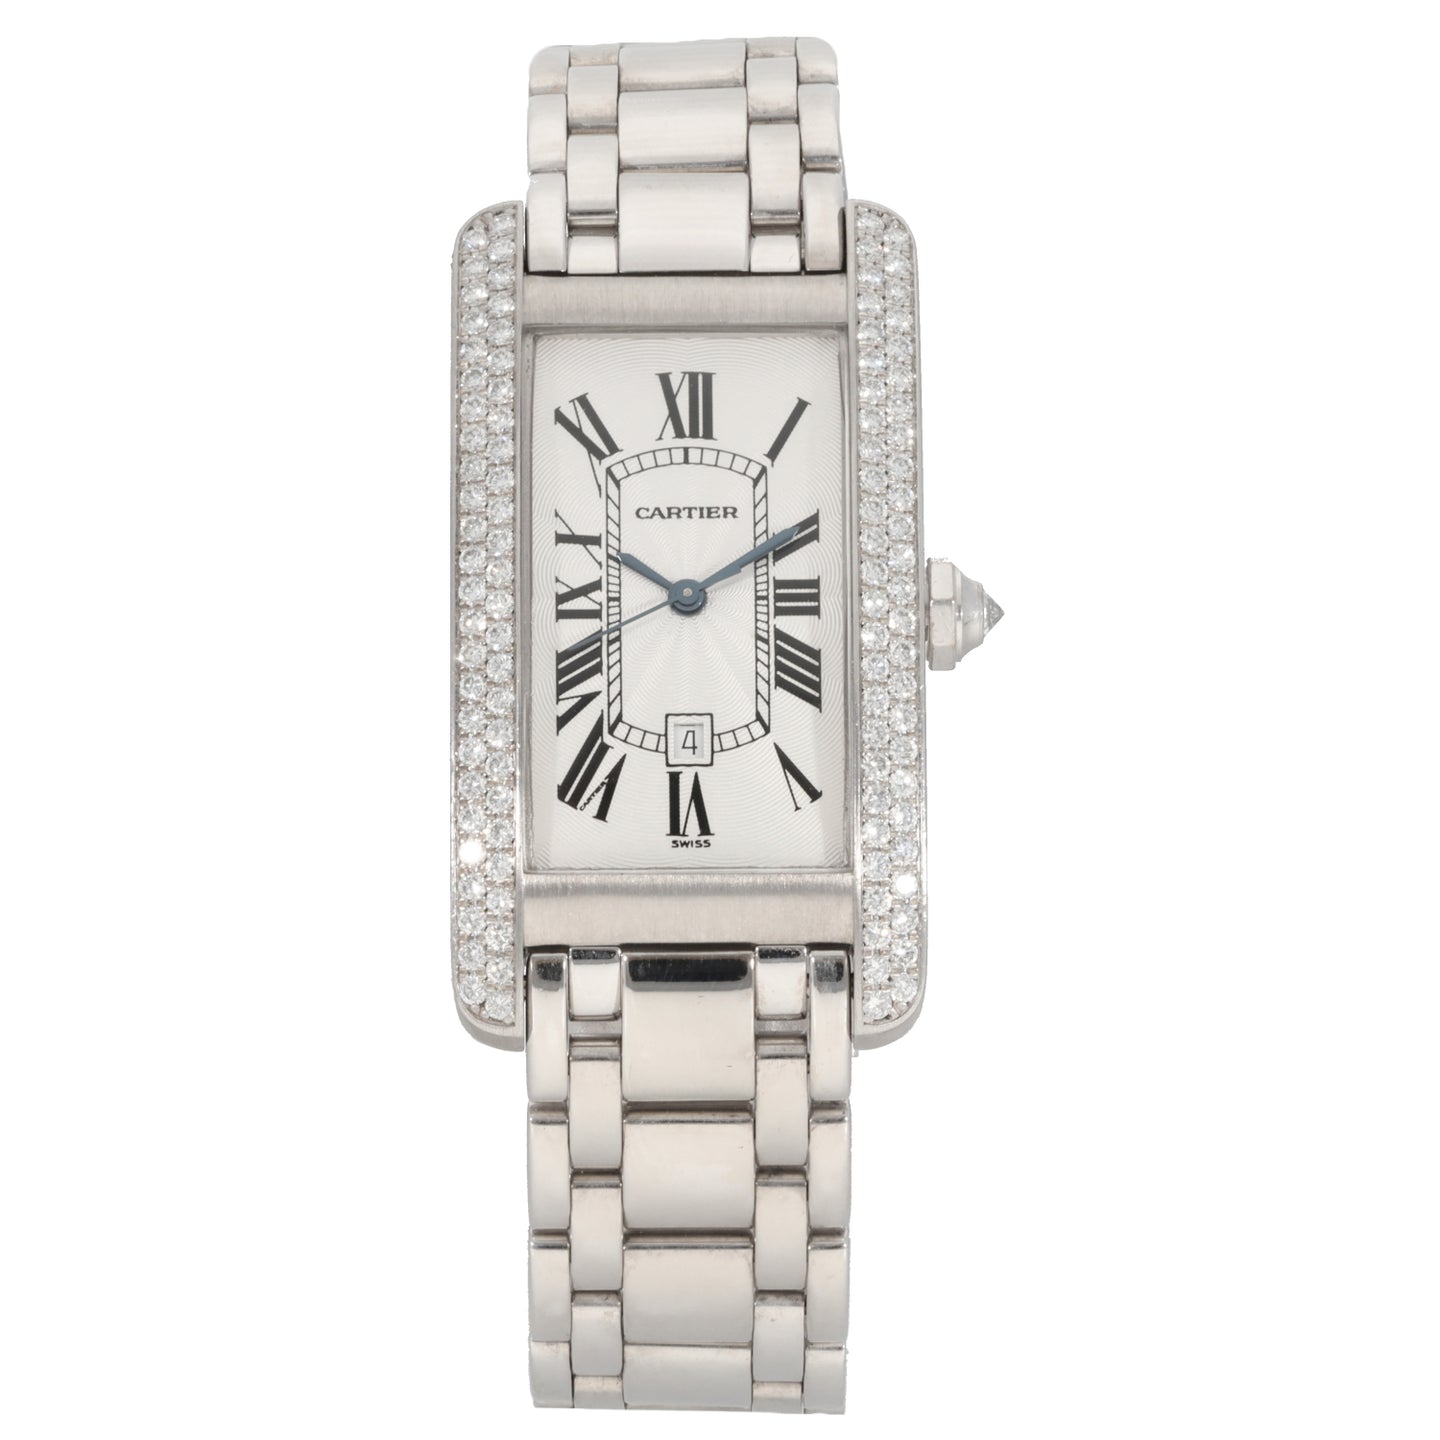 Cartier Tank Americaine 1726 21mm White Gold Watch